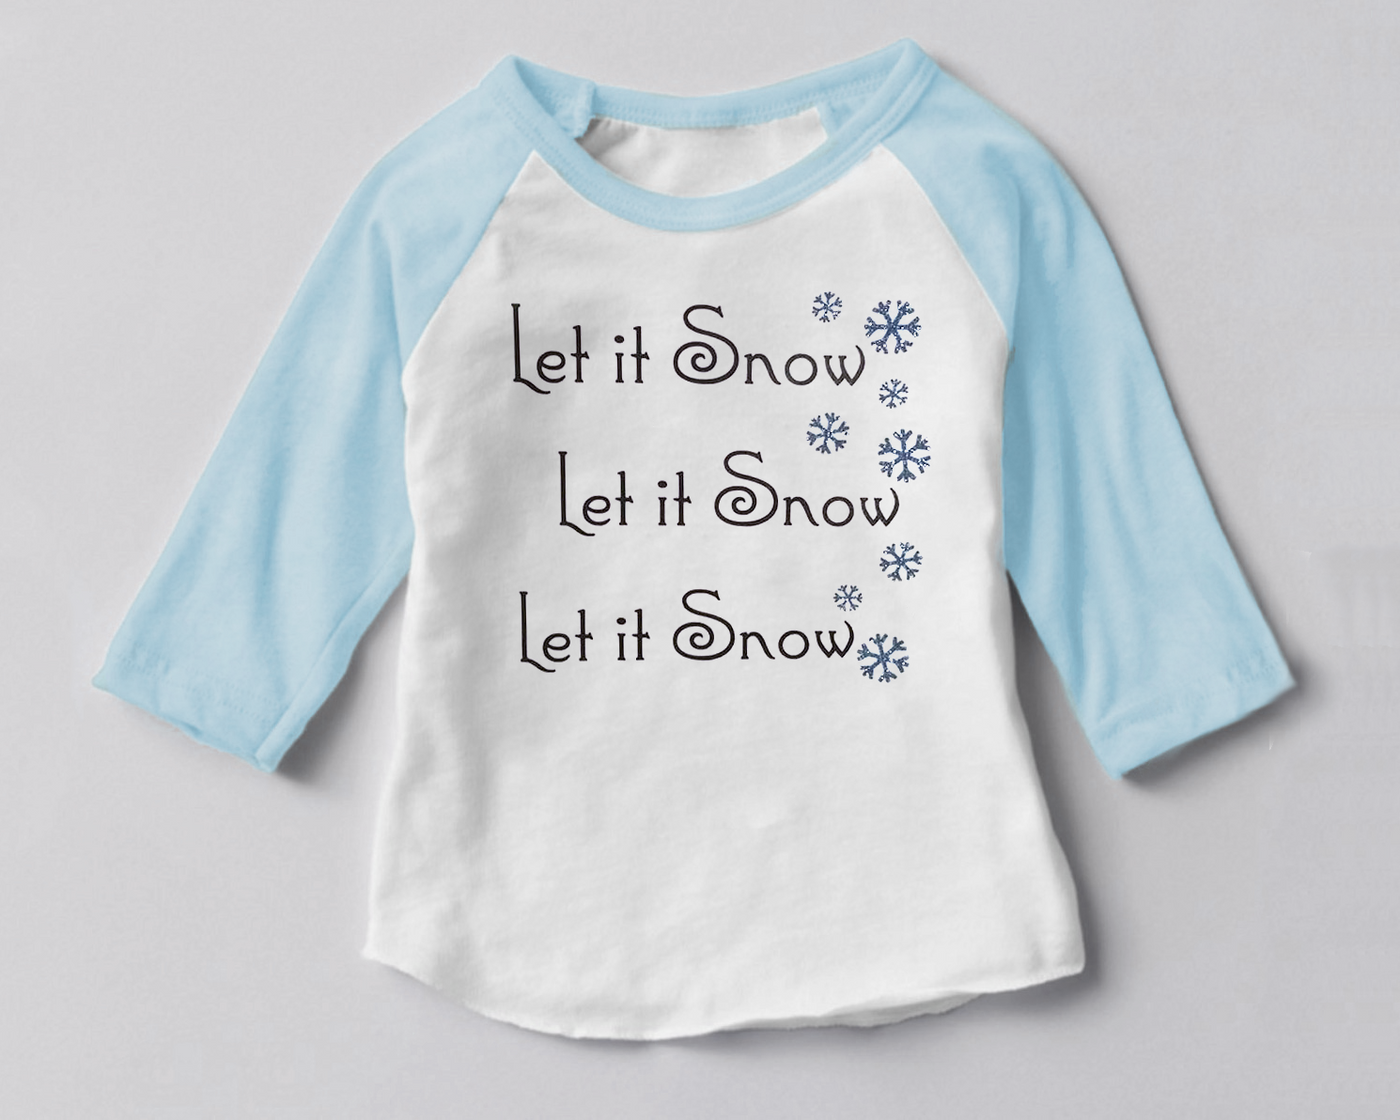 Raglan tee with a design that says "Let it Snow" three times and snowflakes along the side.